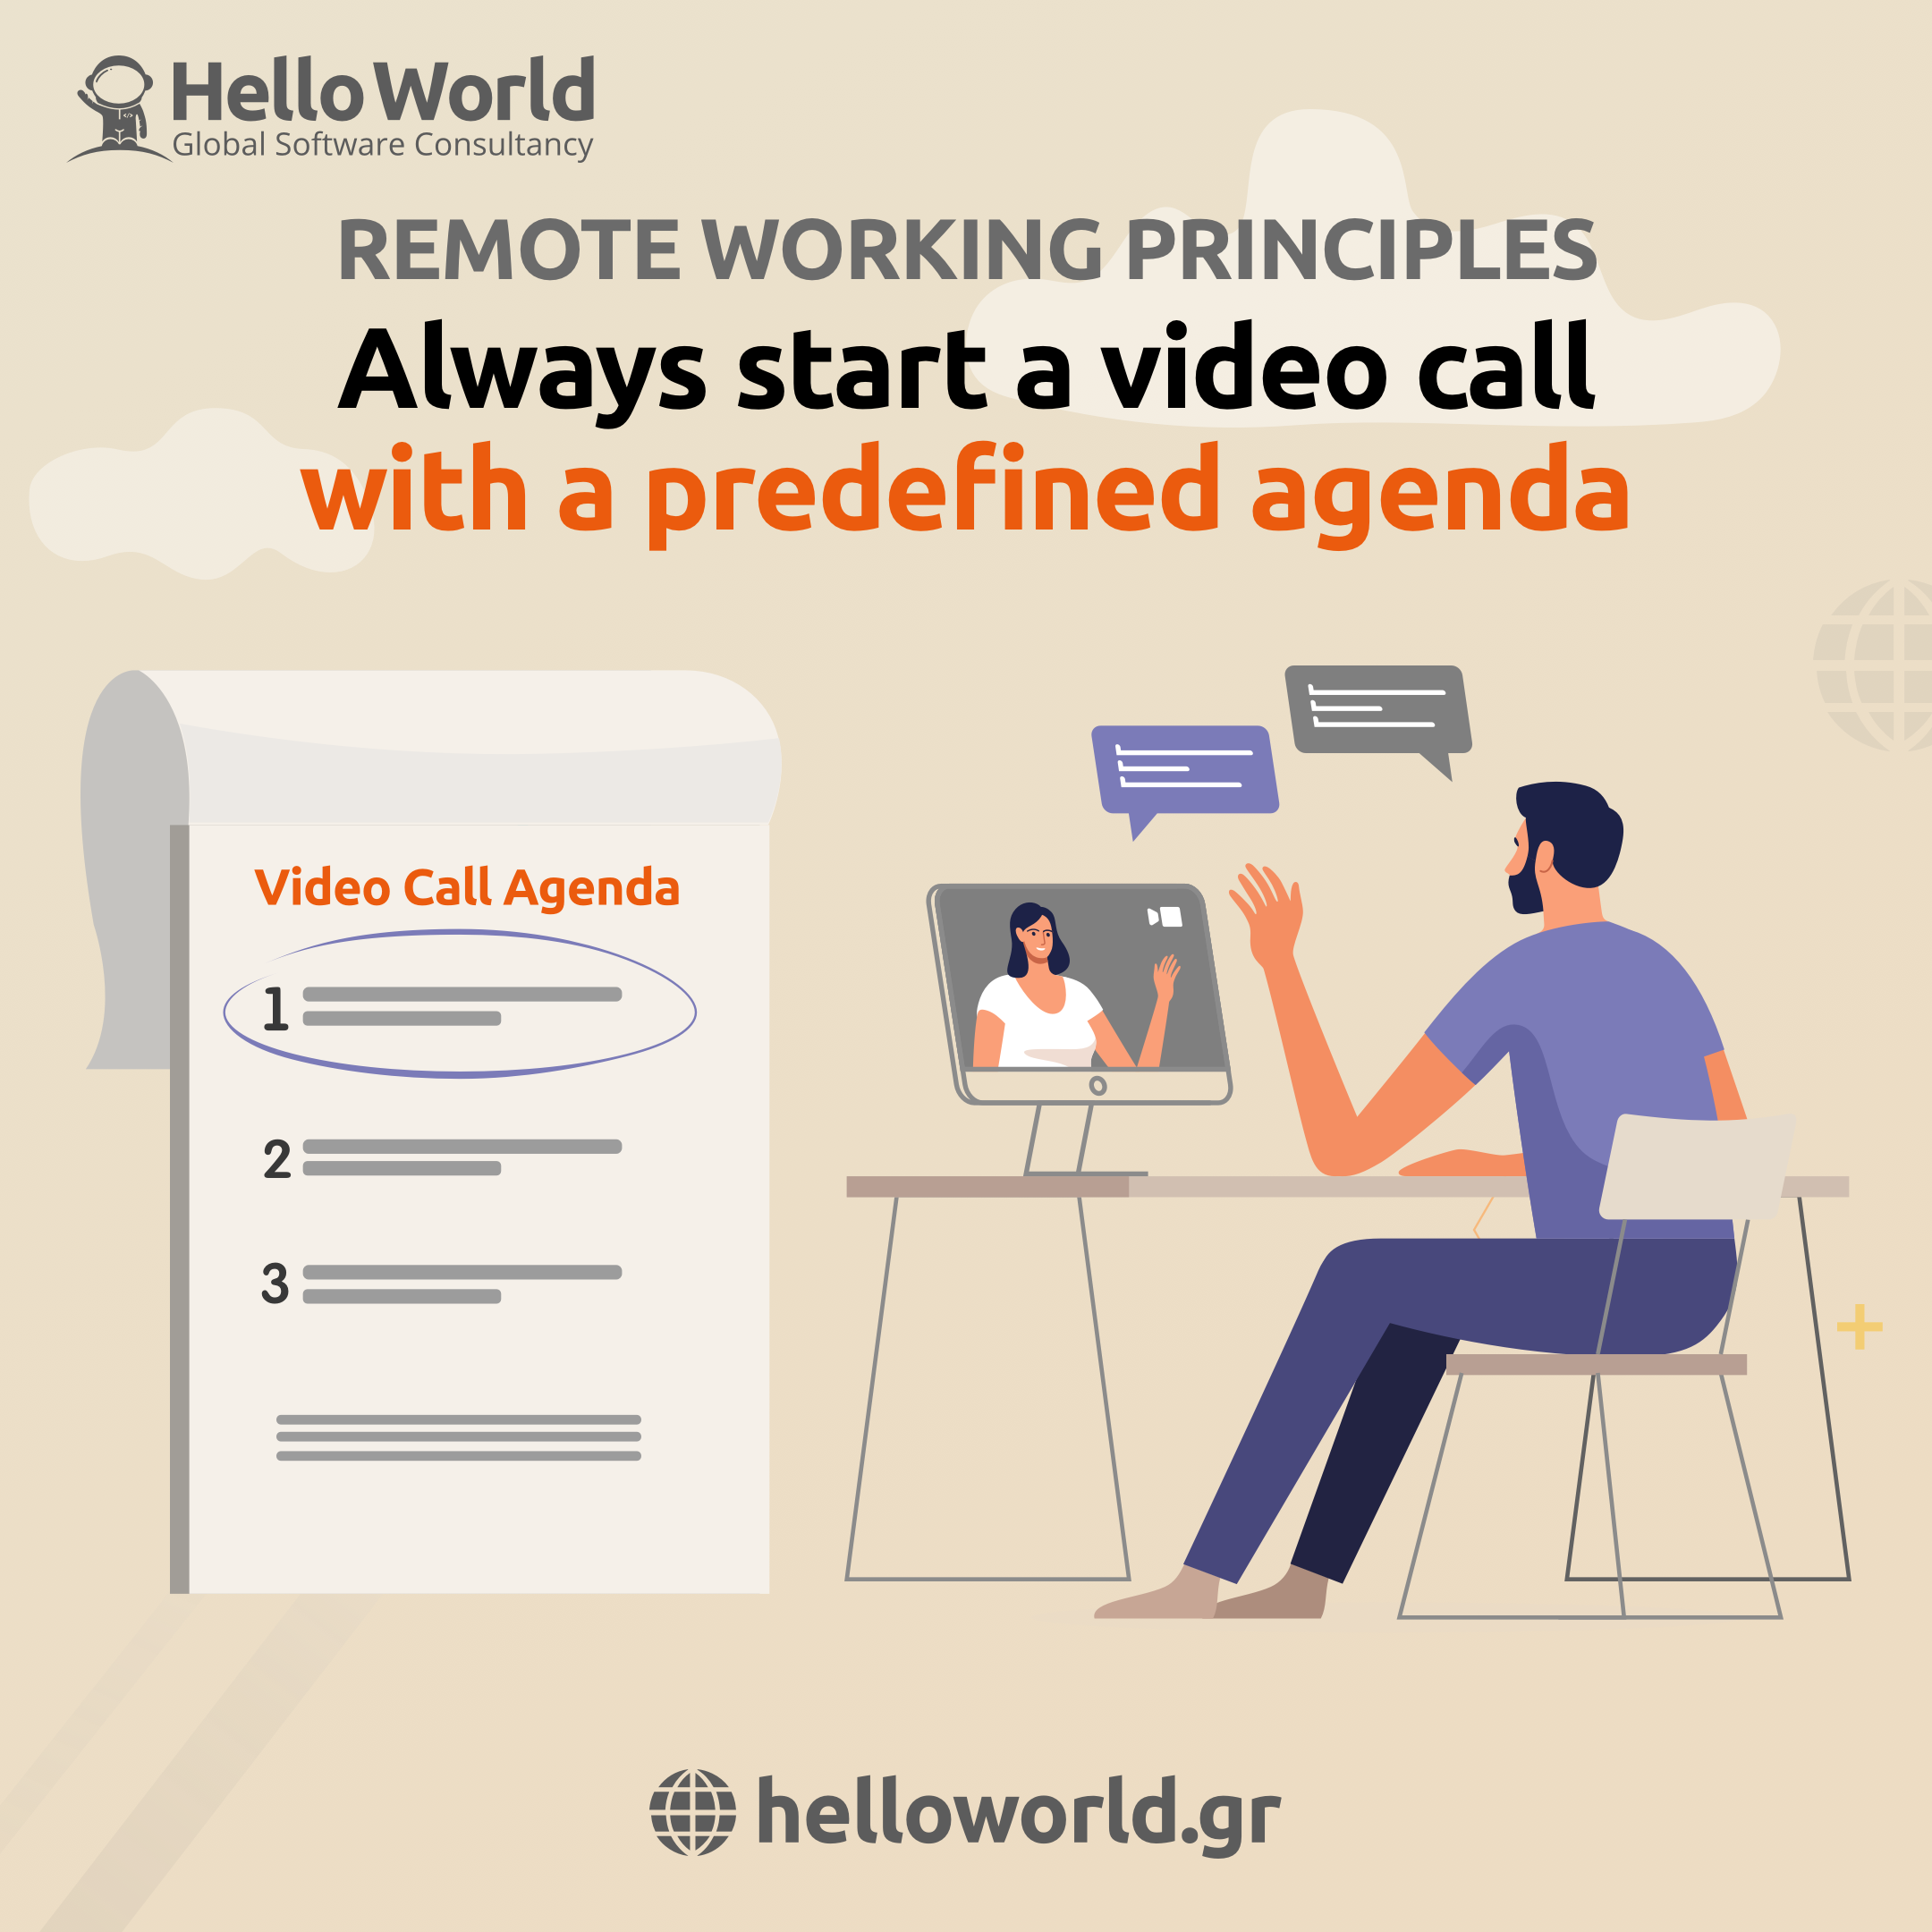 Always start a video call with a predefined agenda